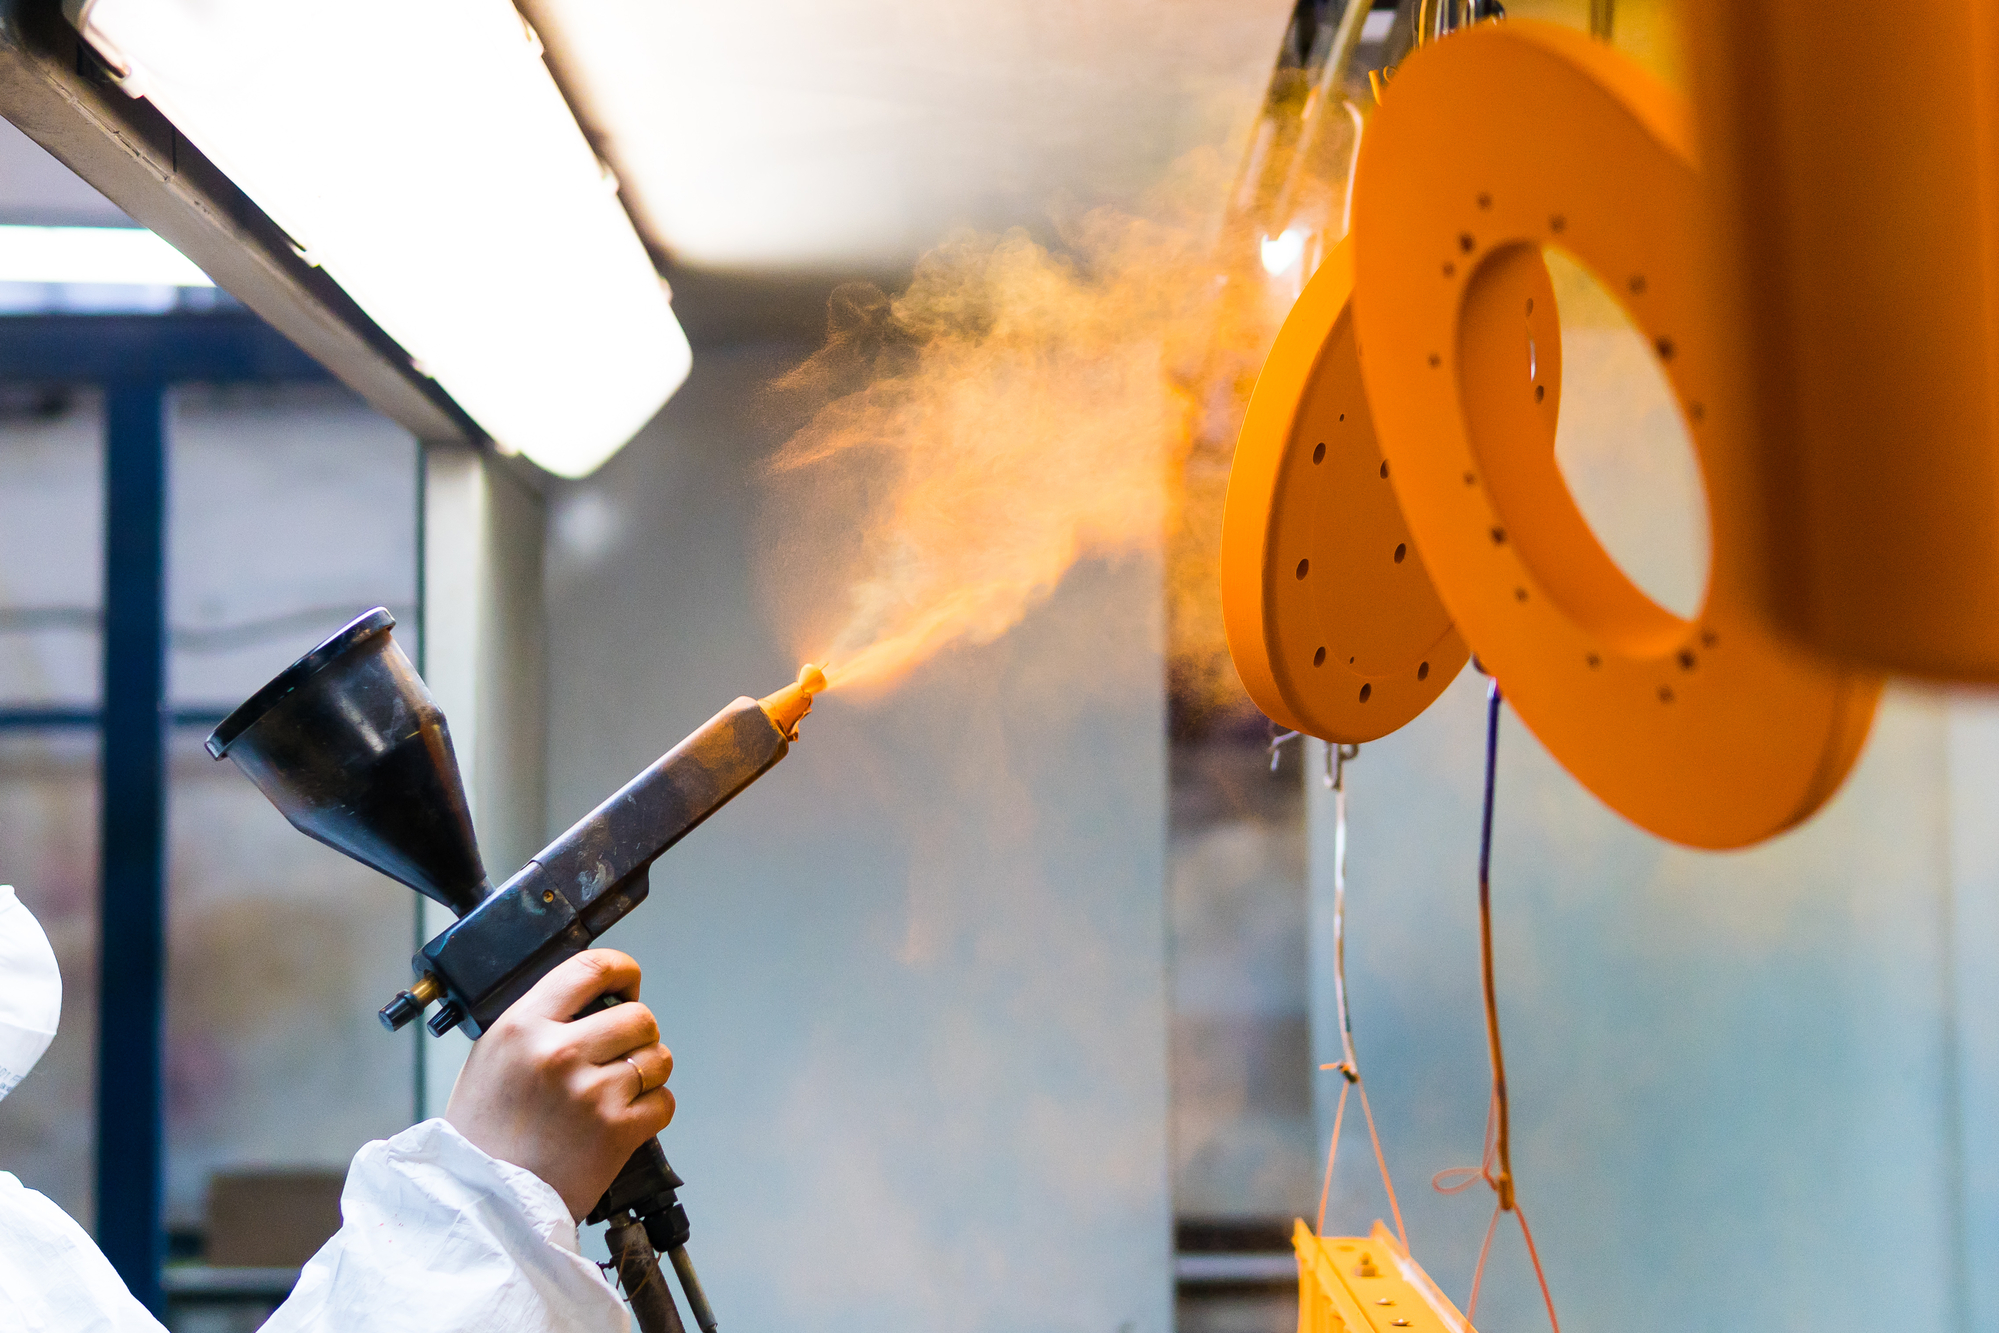 A man in a protective suit sprays powder paint on metal products.